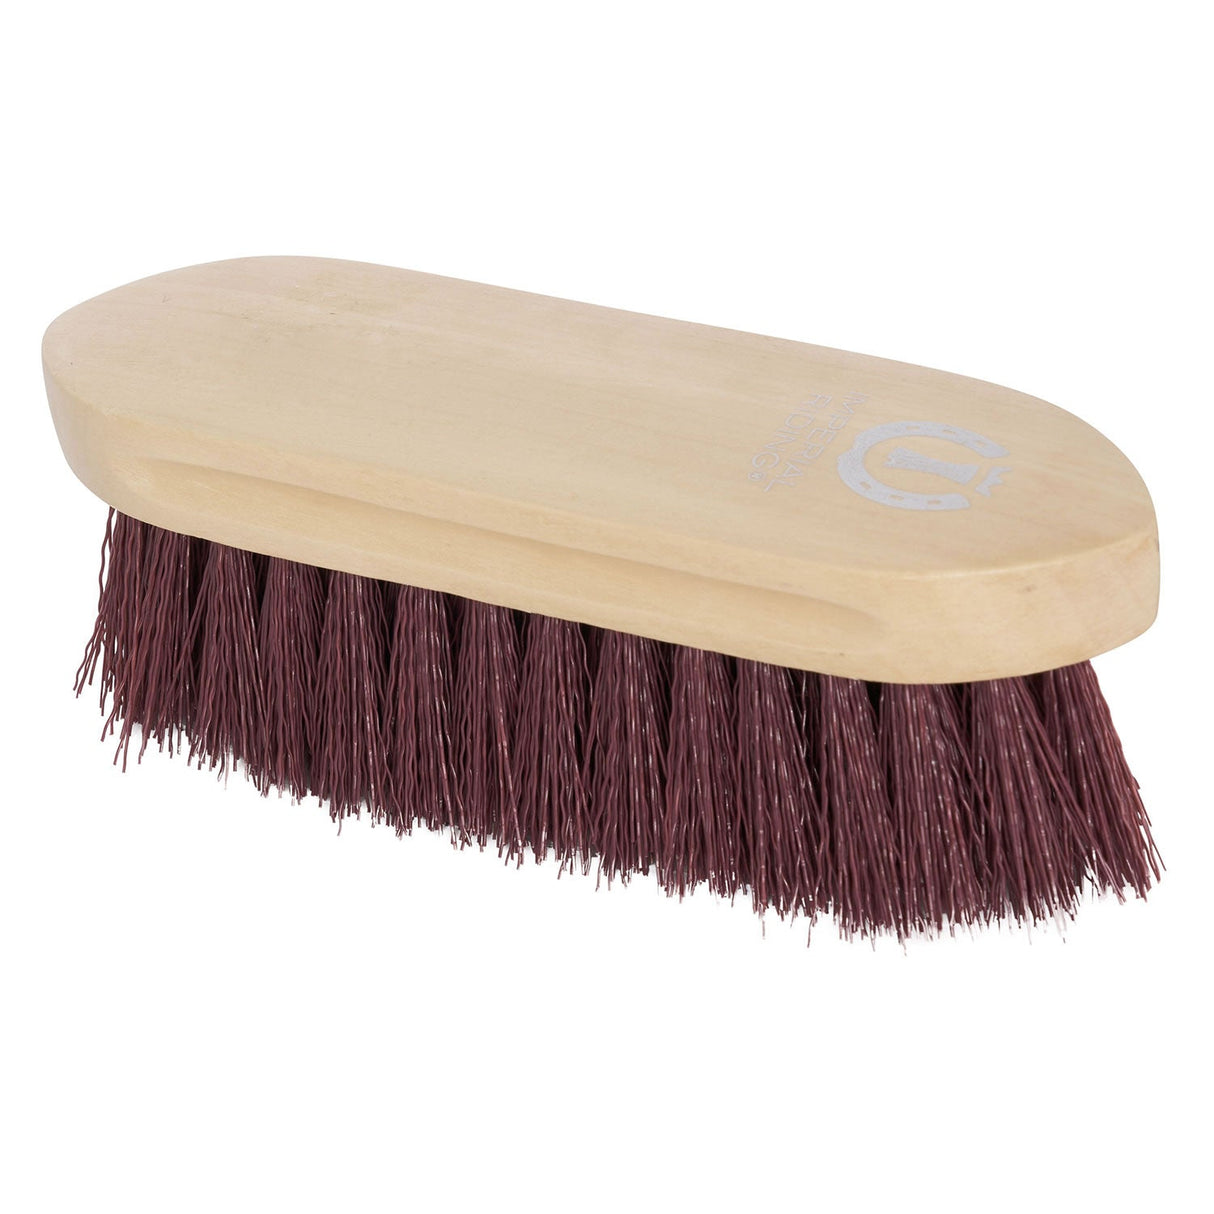 Imperial Riding Dandy Brush Hard With Wooden Back Black Barnstaple Equestrian Supplies